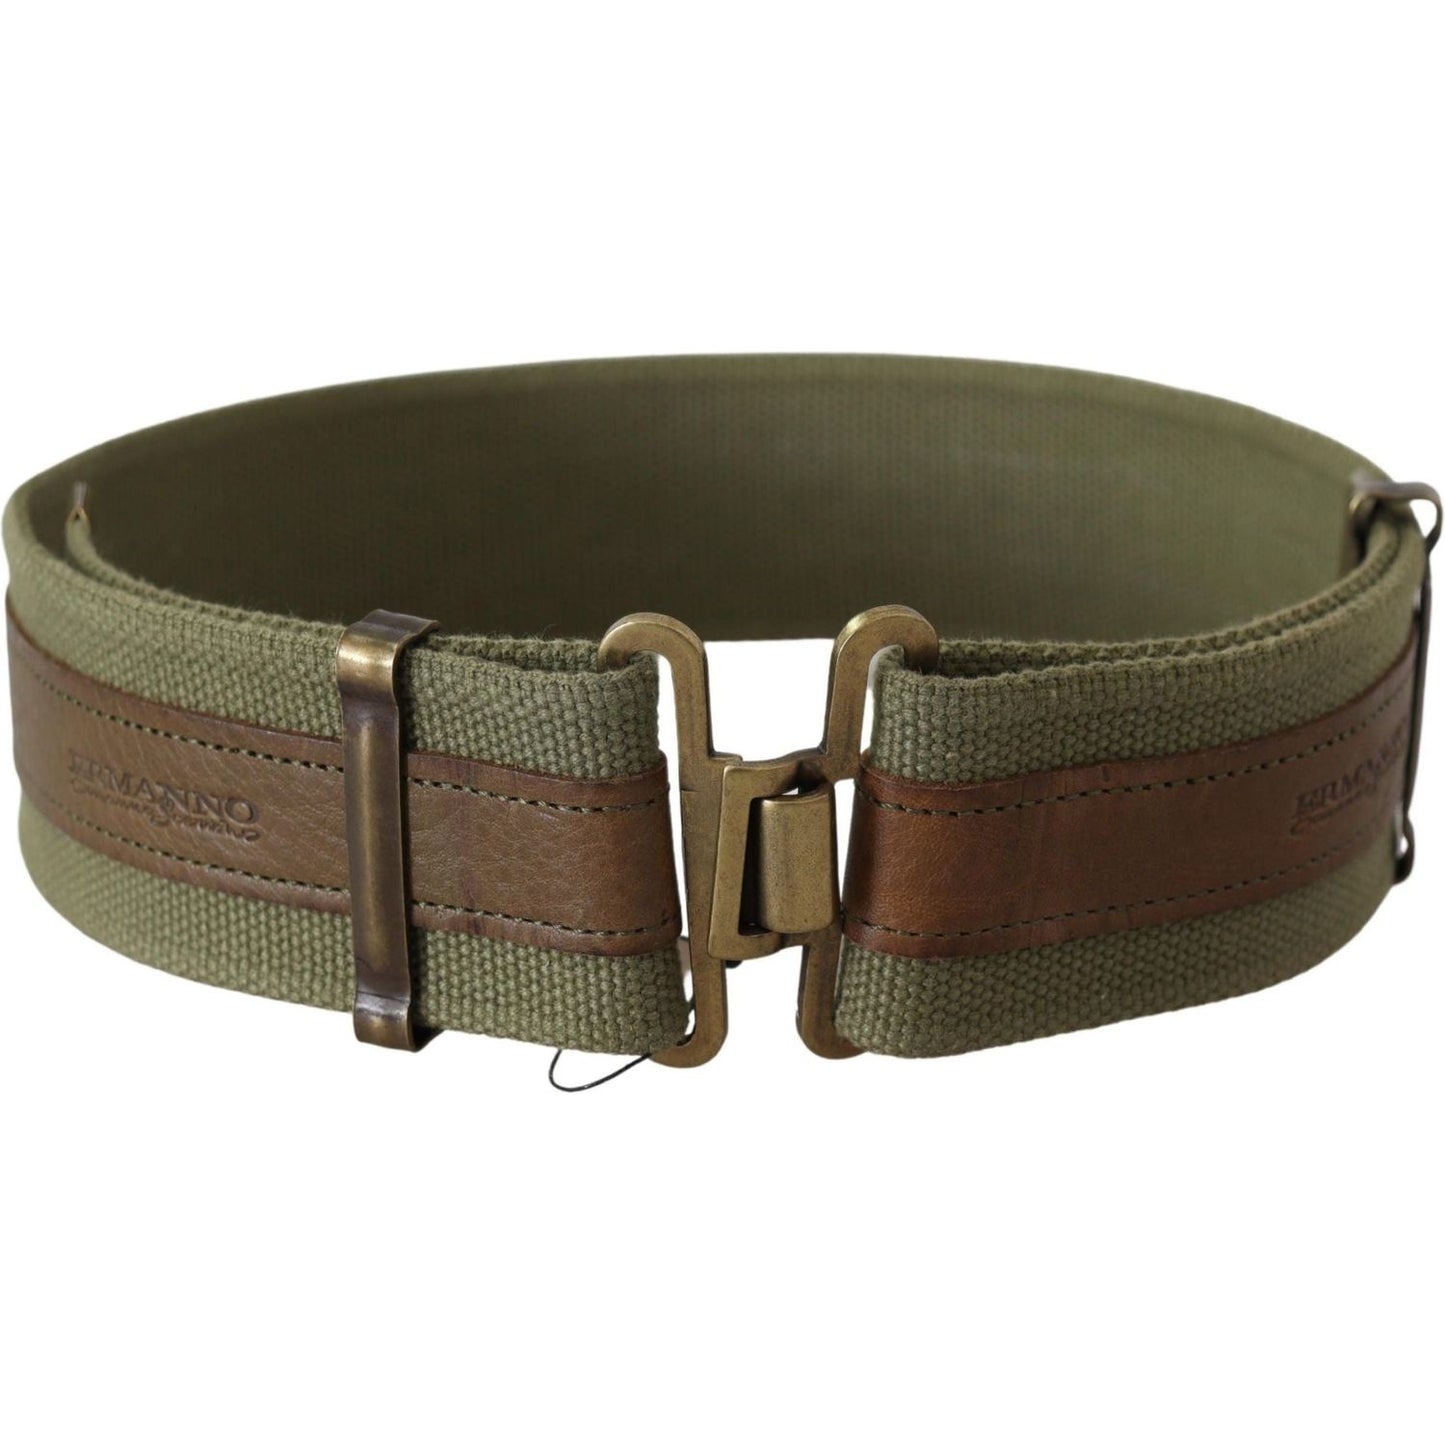 Ermanno Scervino Chic Army Green Rustic Belt Belt green-leather-rustic-bronze-buckle-army-belt IMG_0657-scaled-5fa81896-a12.jpg